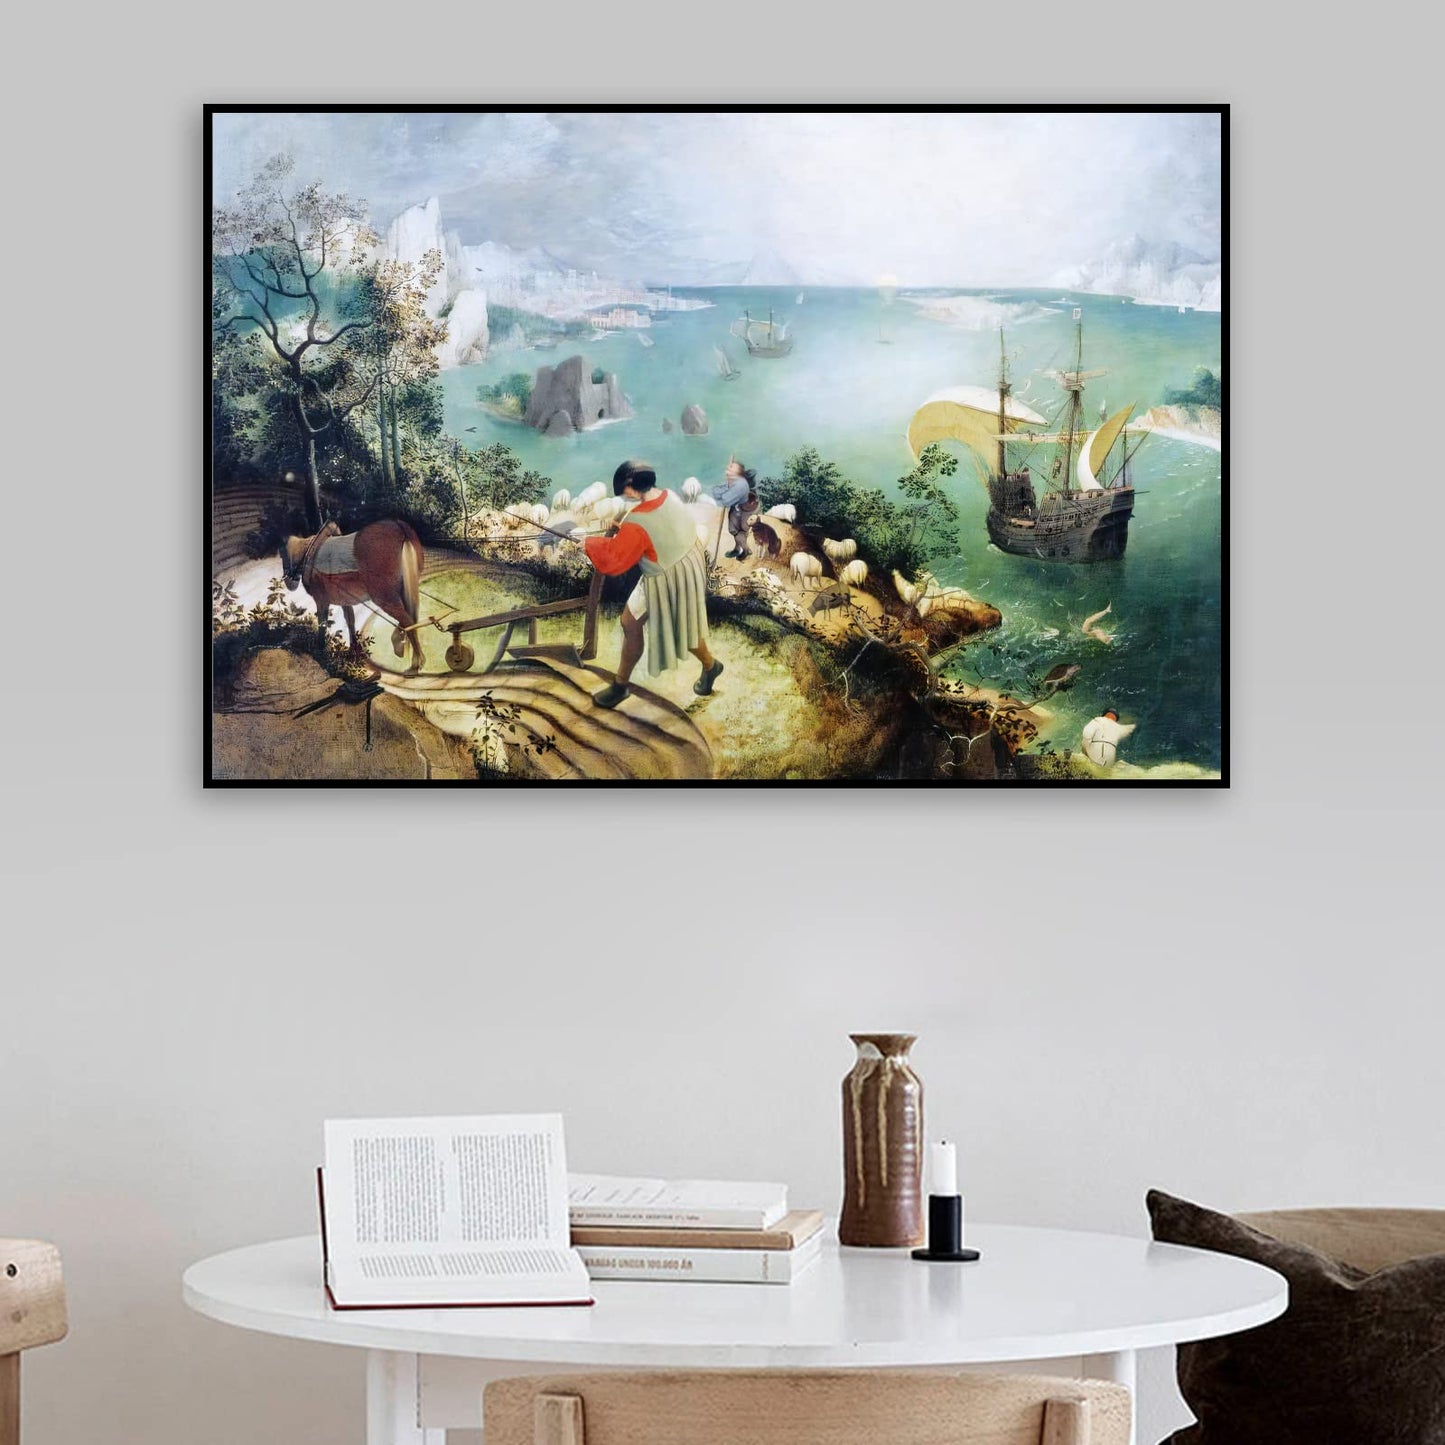 ZZPT Pieter Brueghel The Elder Prints - Landscape with the Fall of Icarus Poster - Modern Canvas Wall Art Famous Painting Reproduction for Living Room Office Unframed (12x18in/30x45cm)